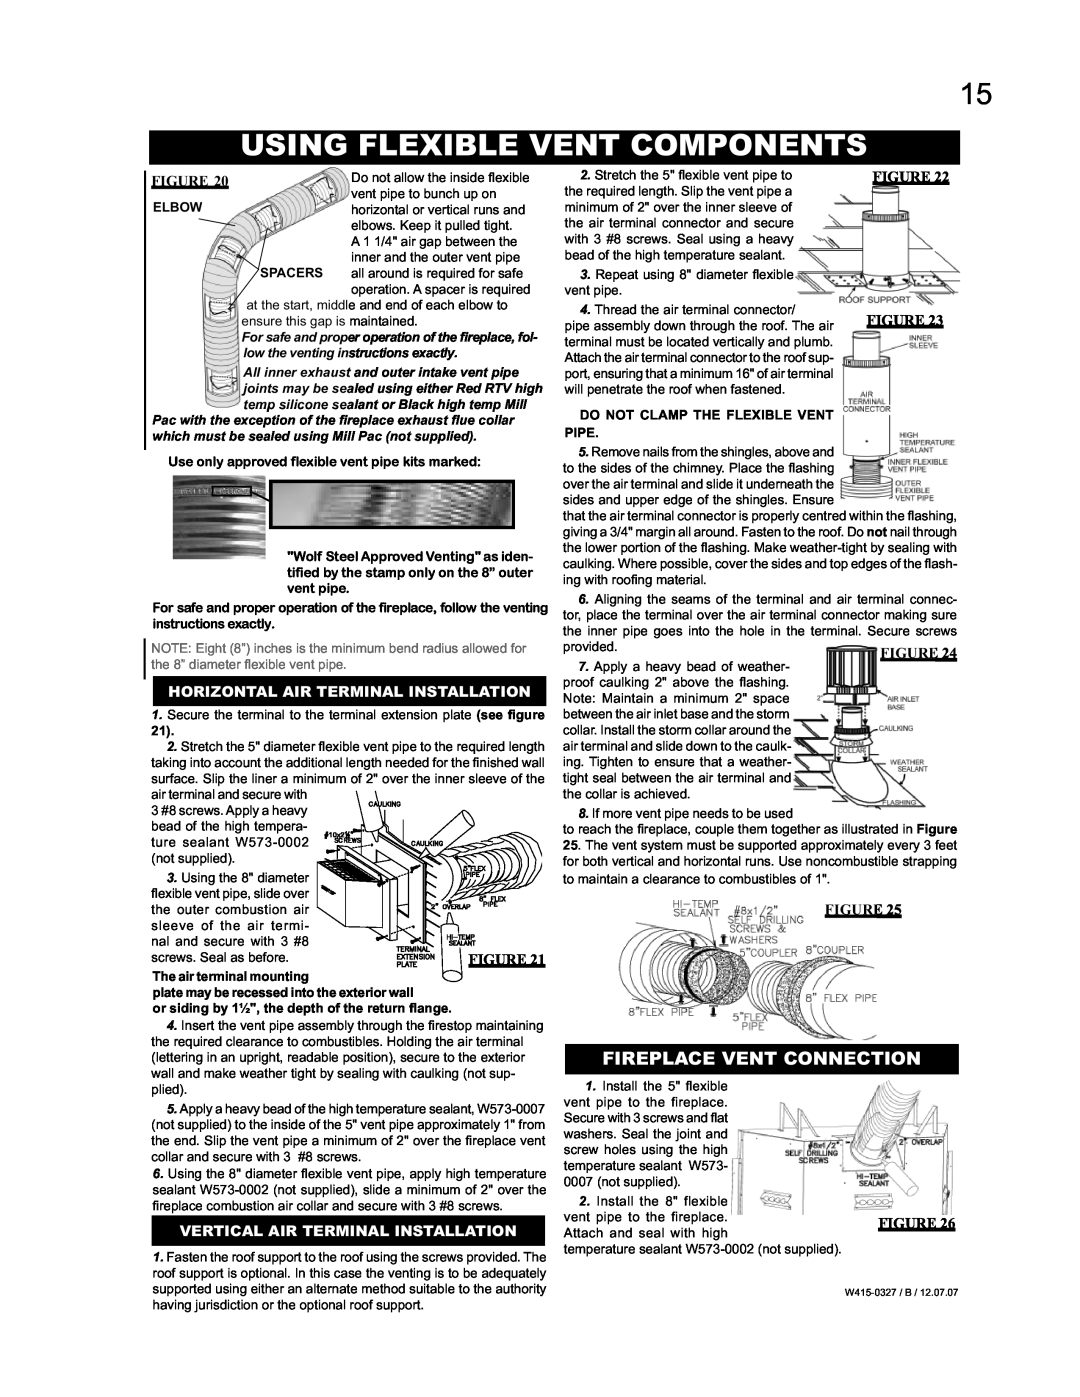 Continental BCDV48N, BCDV48P manual Using Flexible Vent Components, Fireplace Vent Connection, Figure Figure 